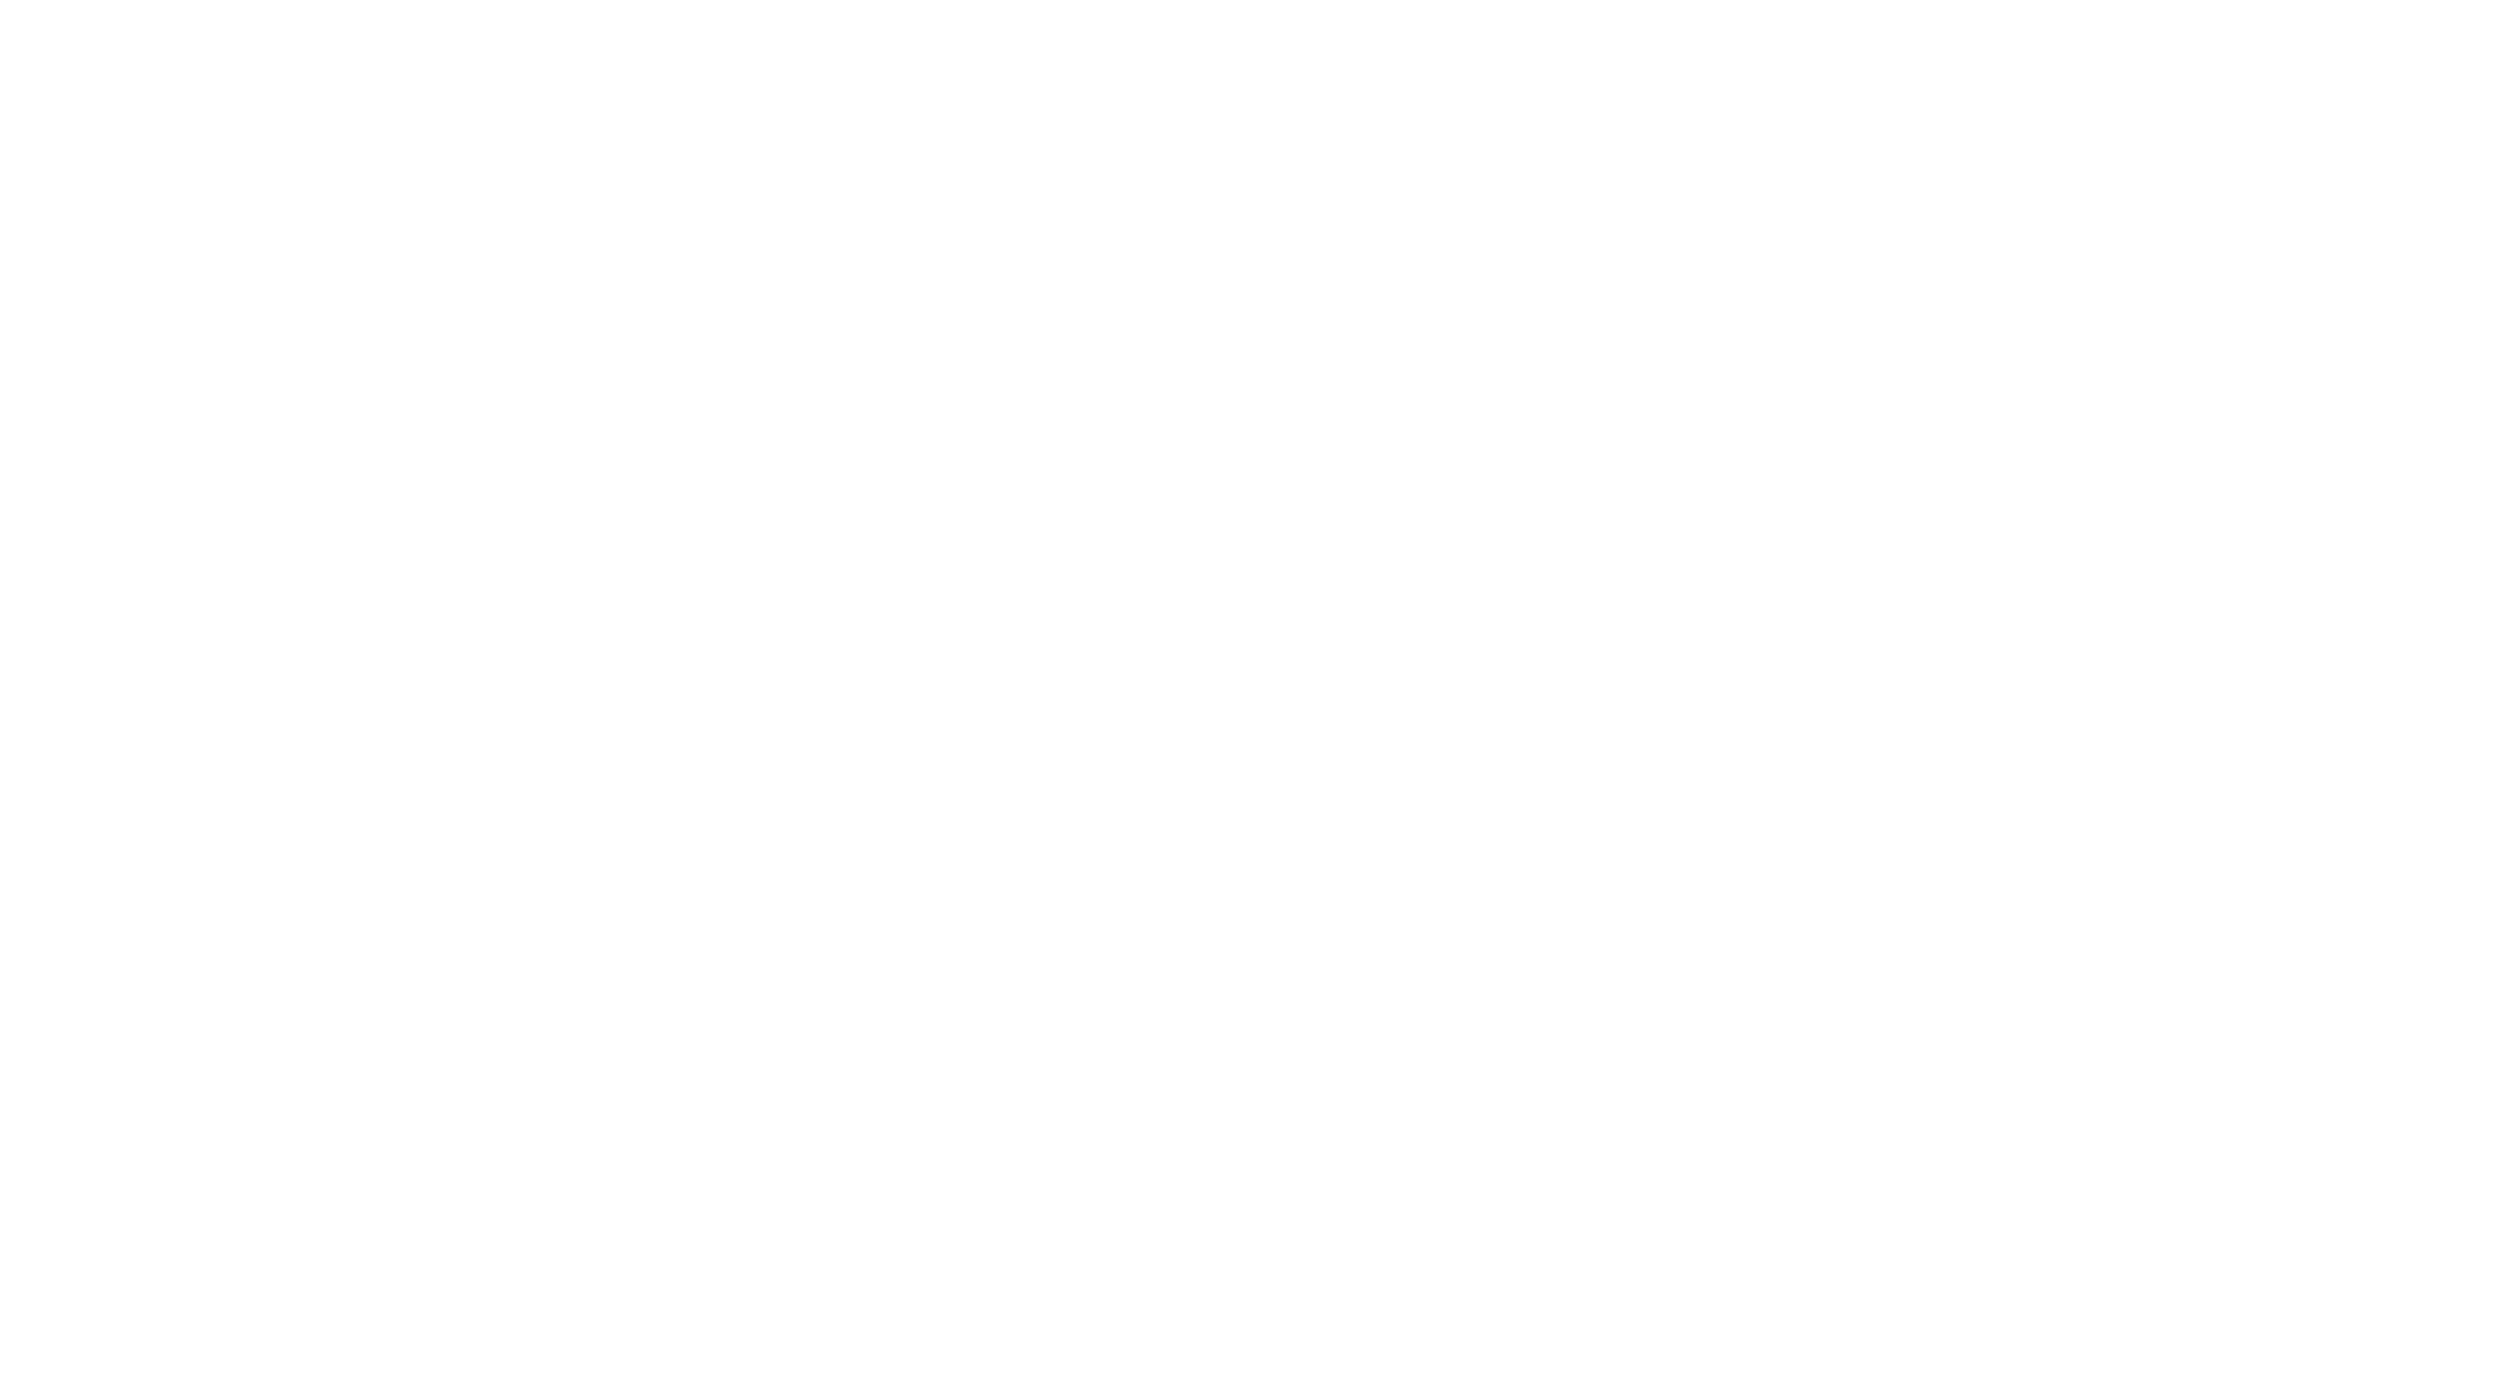 students for liberty